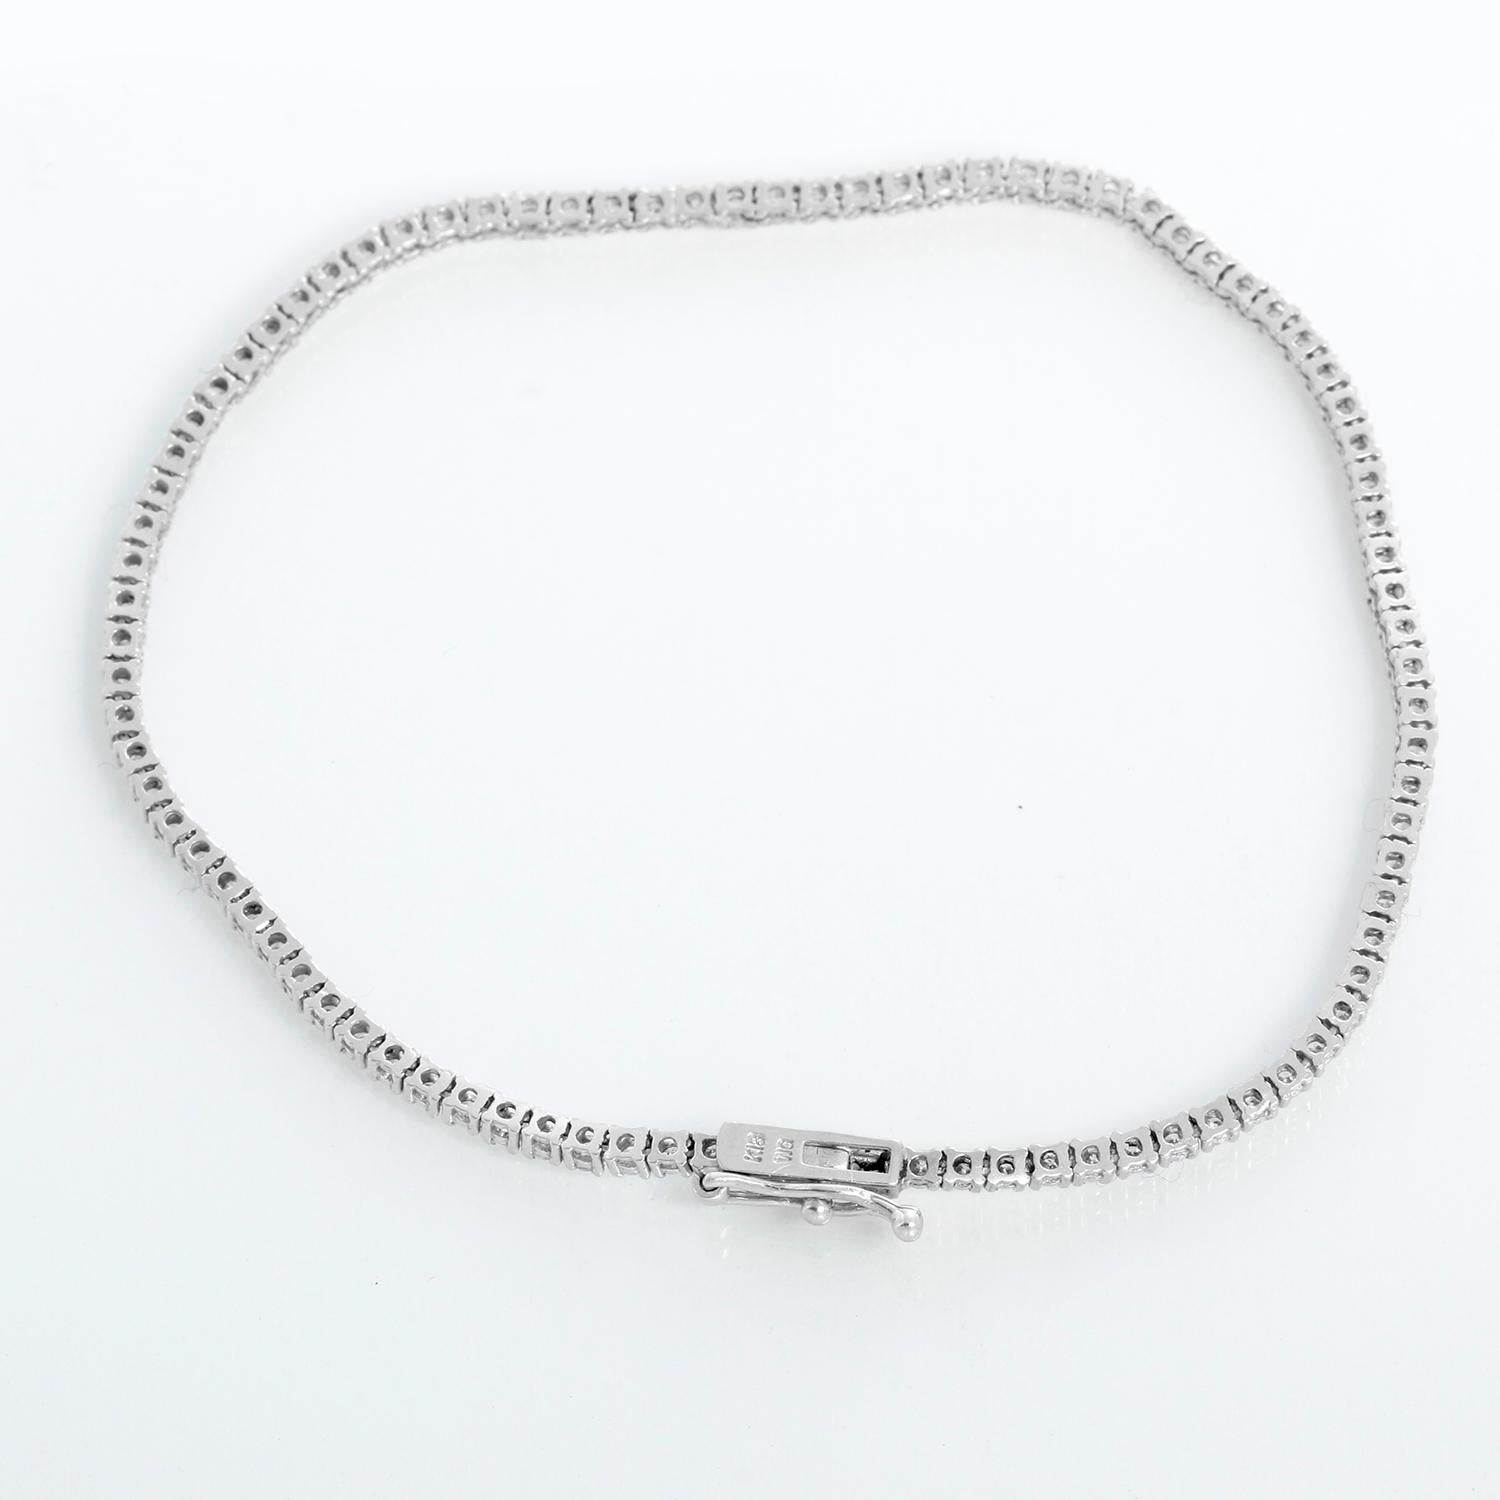 18k White Gold 1.25 ct. Diamond Tennis Bracelet Size 7  - This stunning tennis bracelet features 1.25 carats of SI2-SI3 clarity and HI-color diamonds set in 18k white gold. Bracelet measures 7  inches in length. .